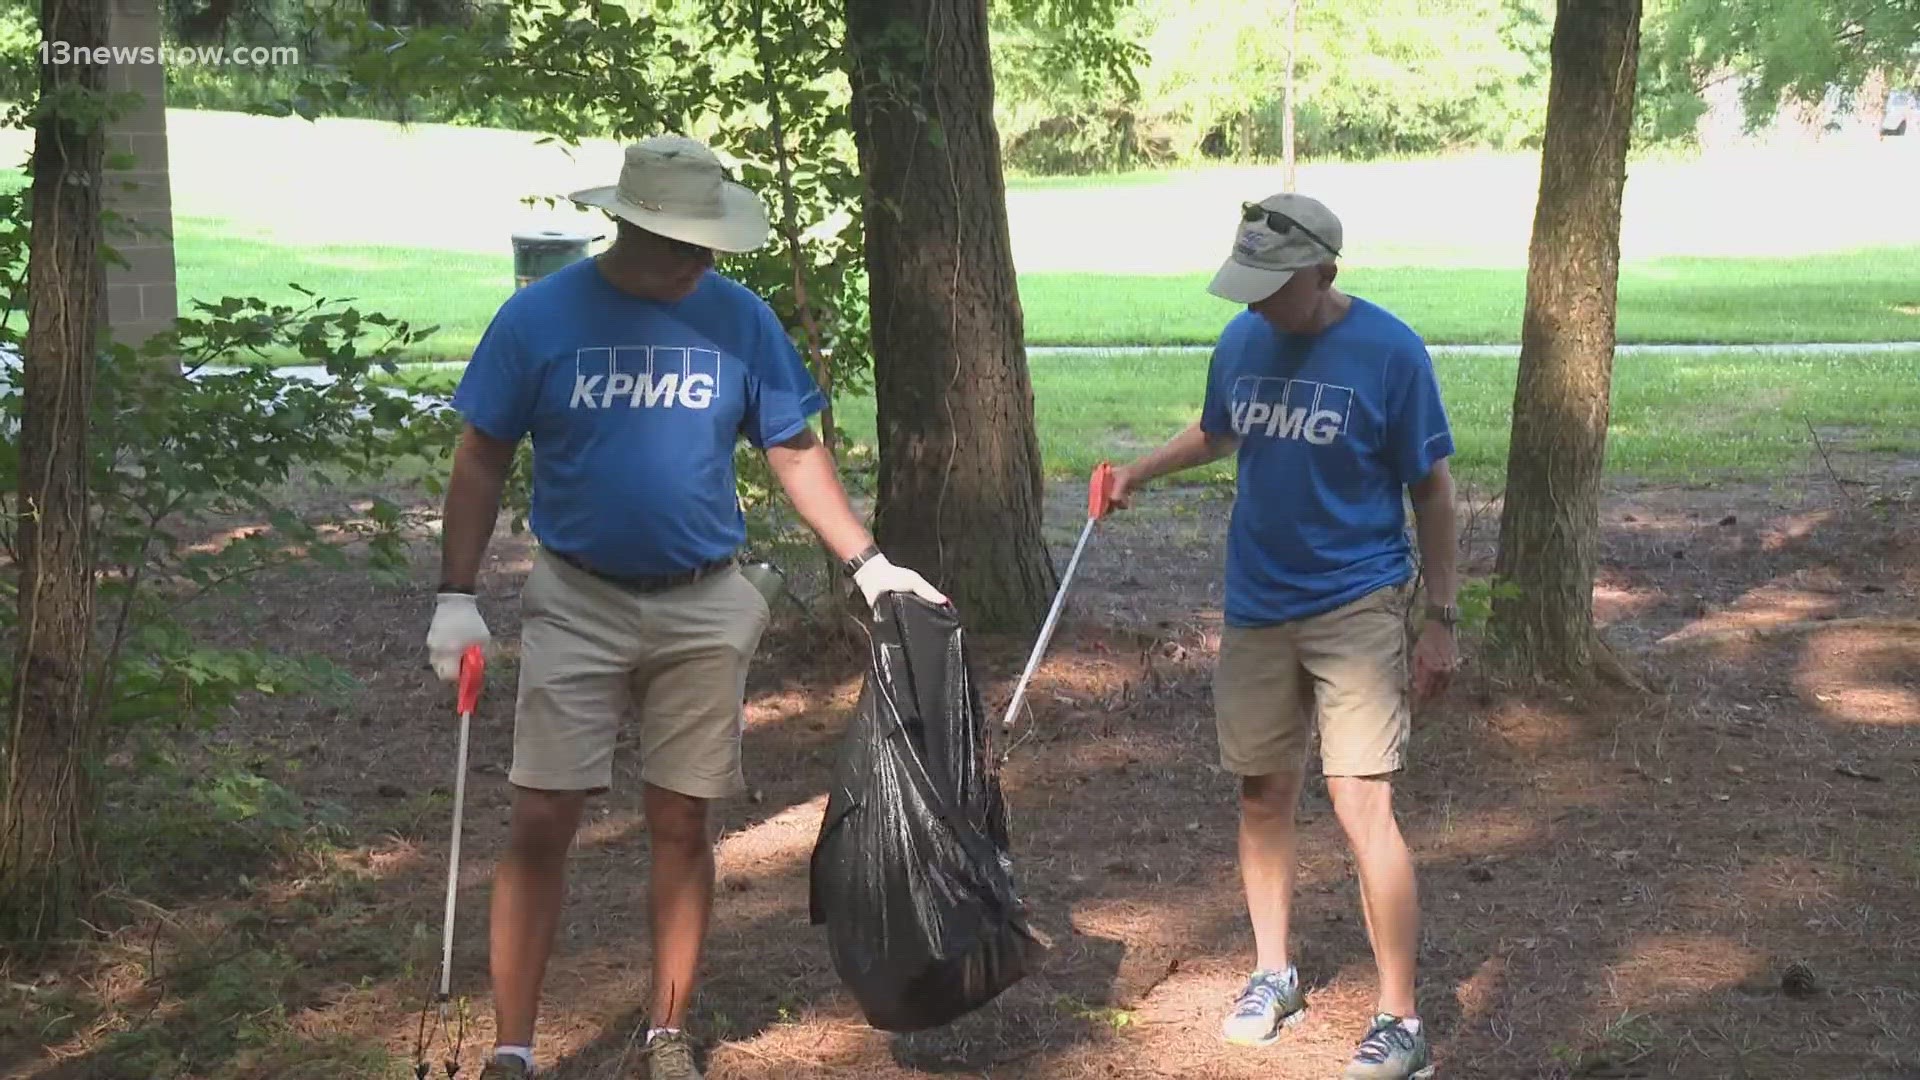 The clean-ups took place at Deep Creek Park and Dismal Swamp Canal Trail.